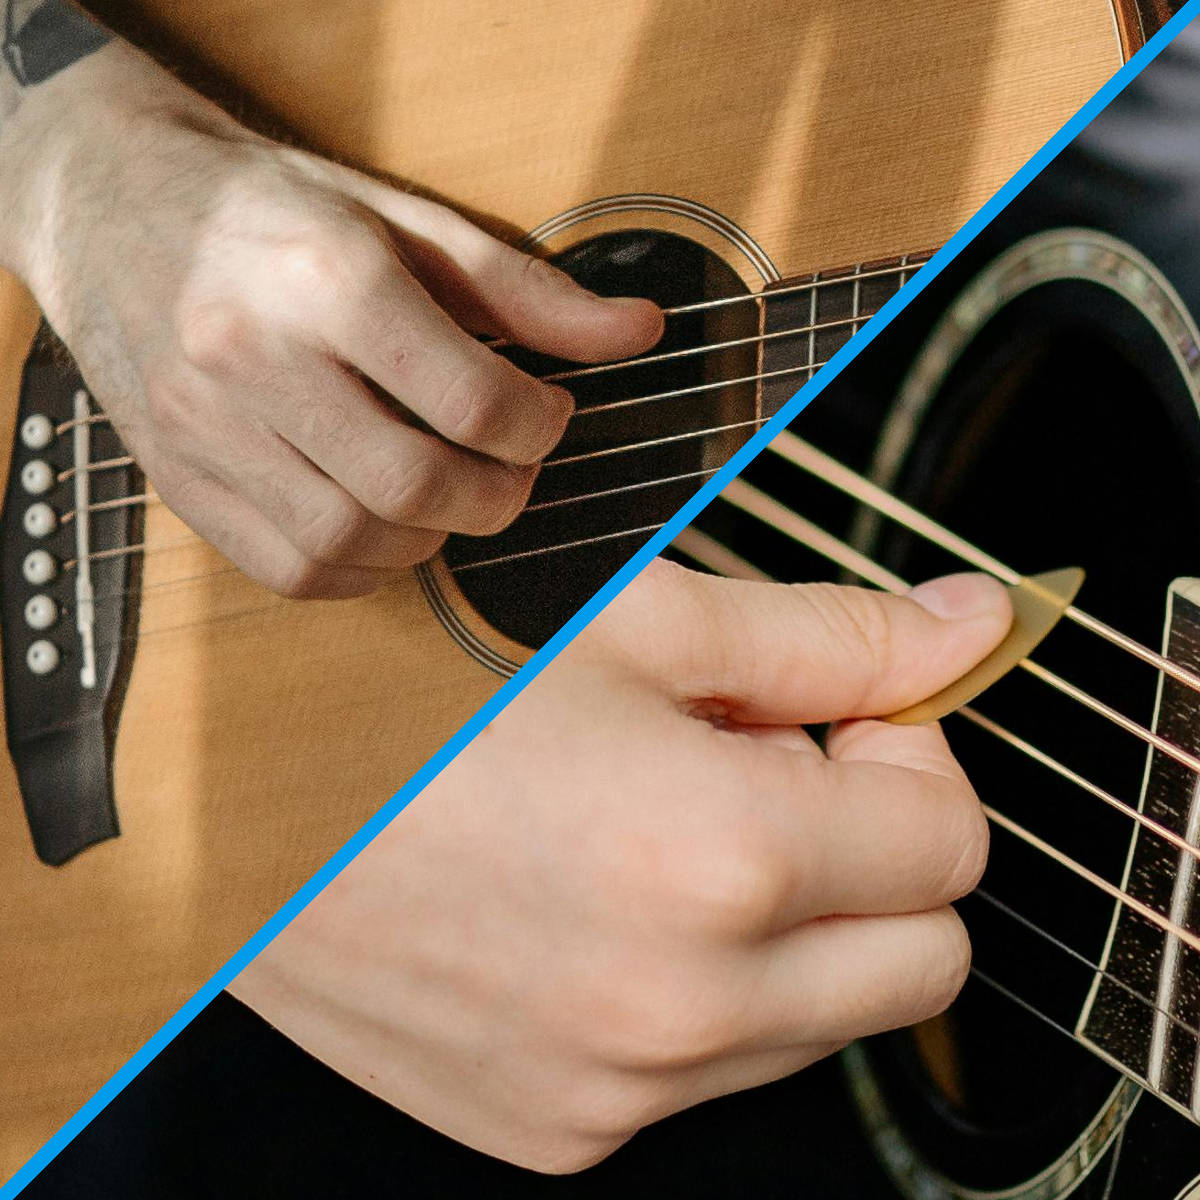 Flatpick or fingerstyle are two ways to play guitar